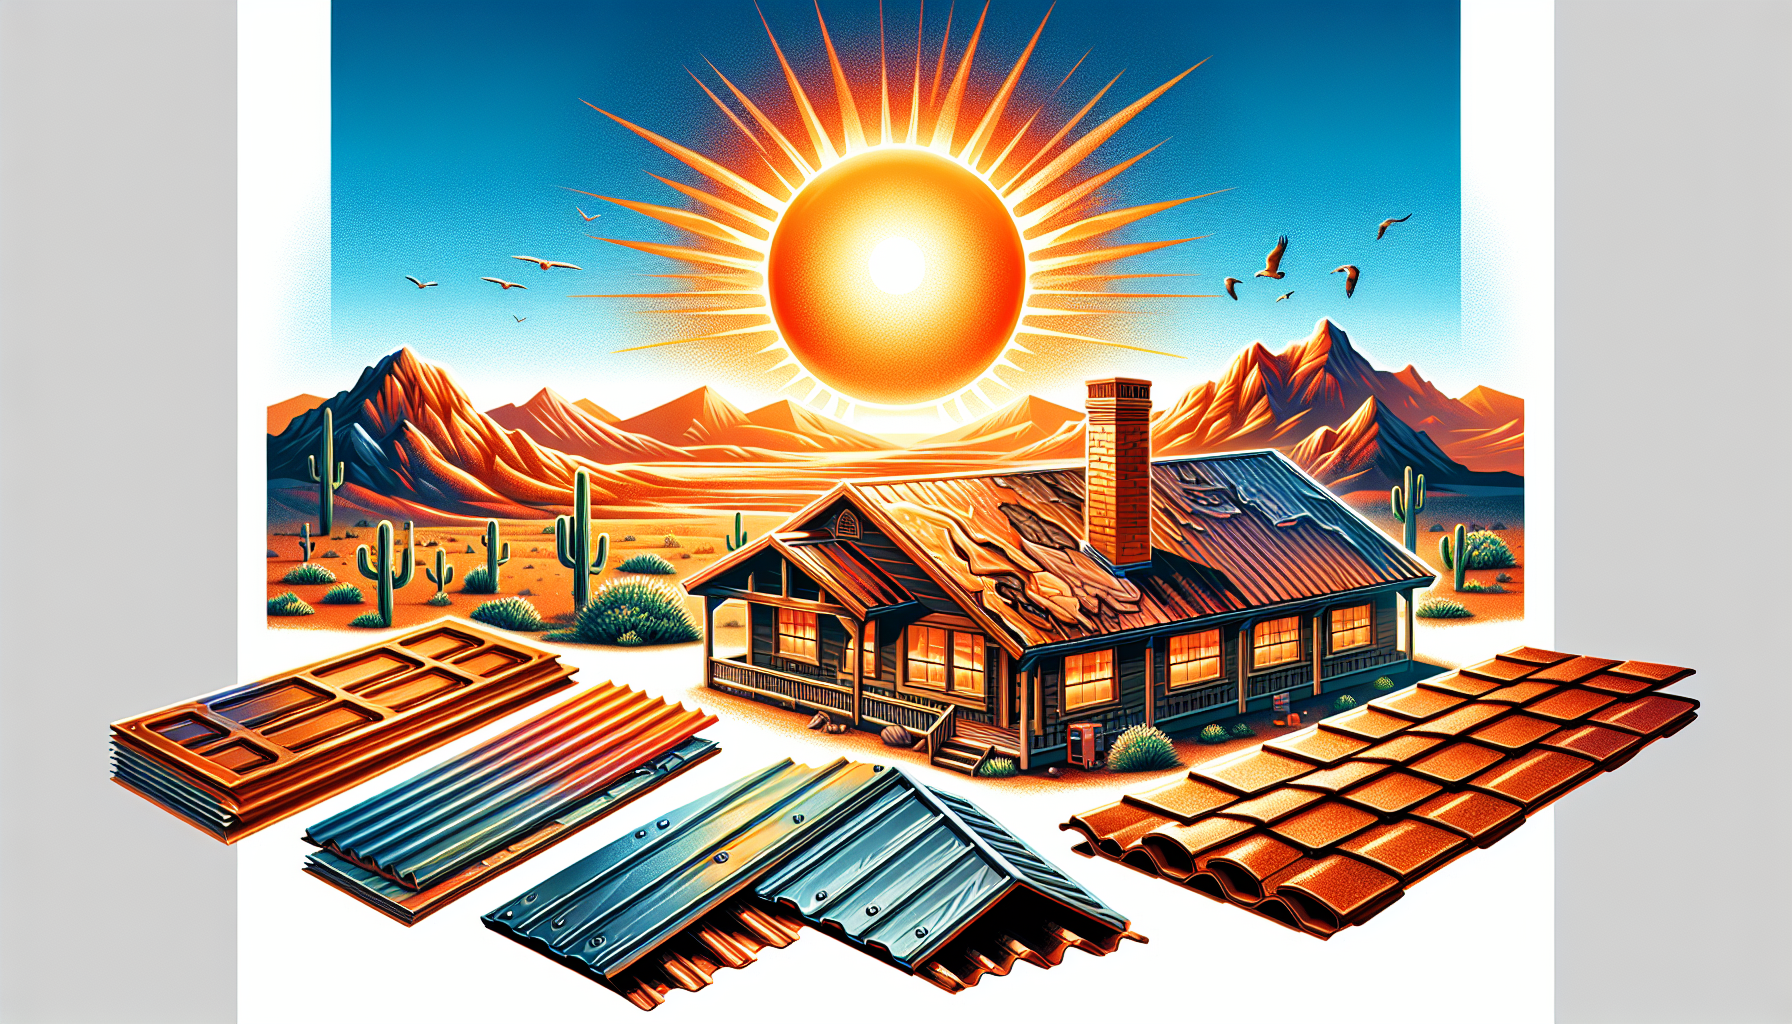 Arizona sun and roofing materials